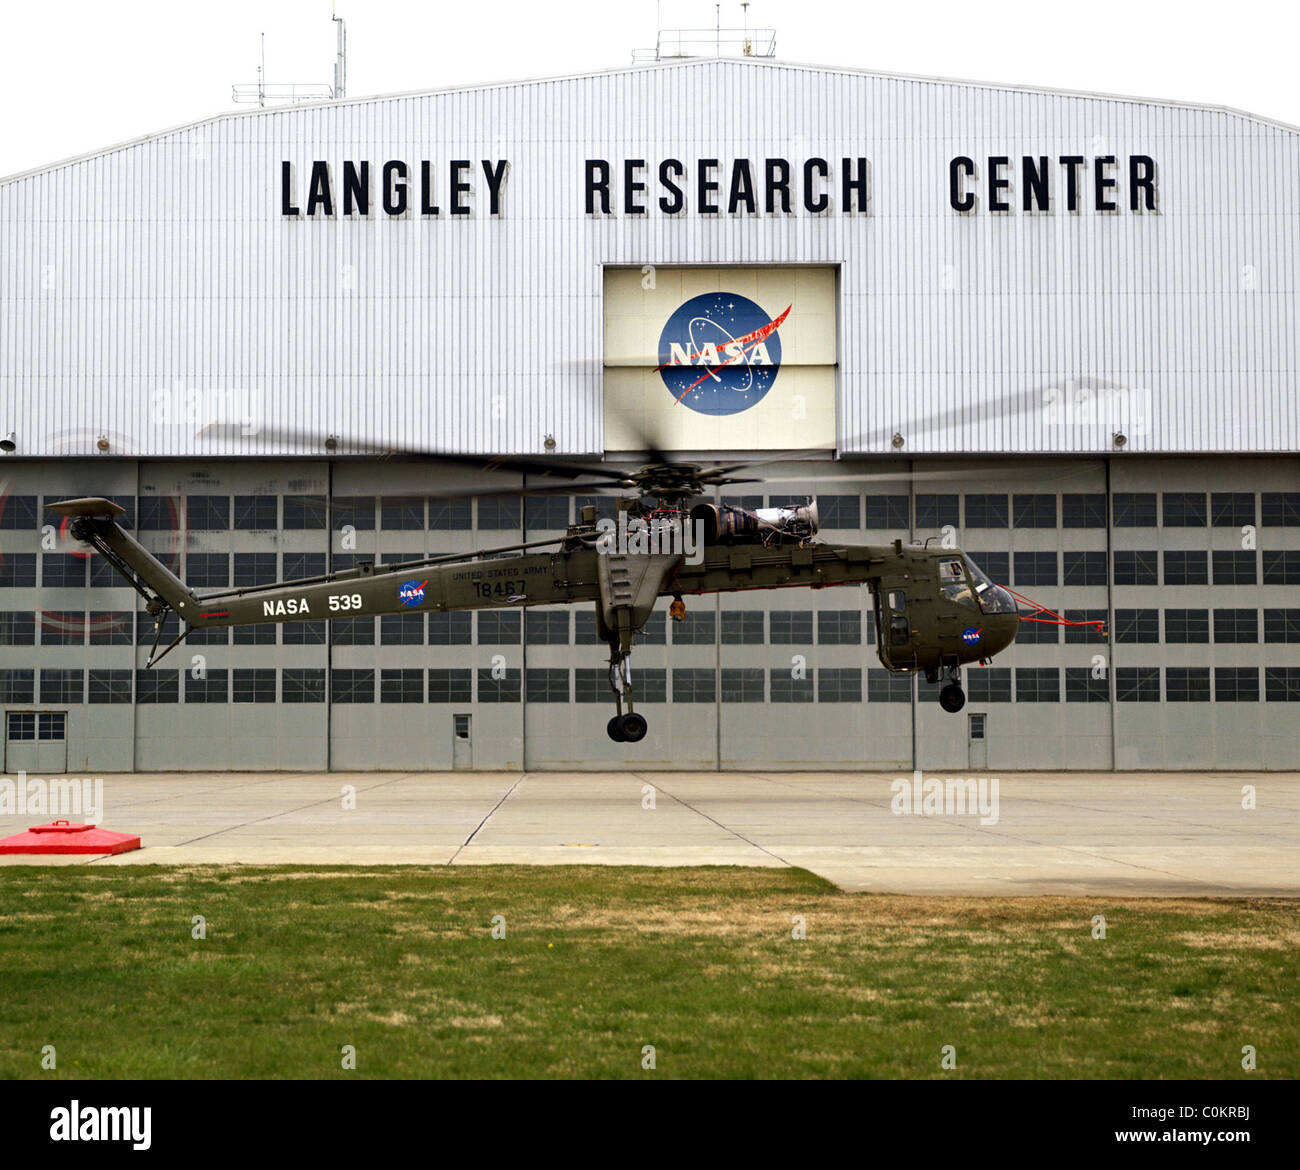 Sikorsky S-64 Skycrane helicopter, Langley Research Center. USA Stock Photo